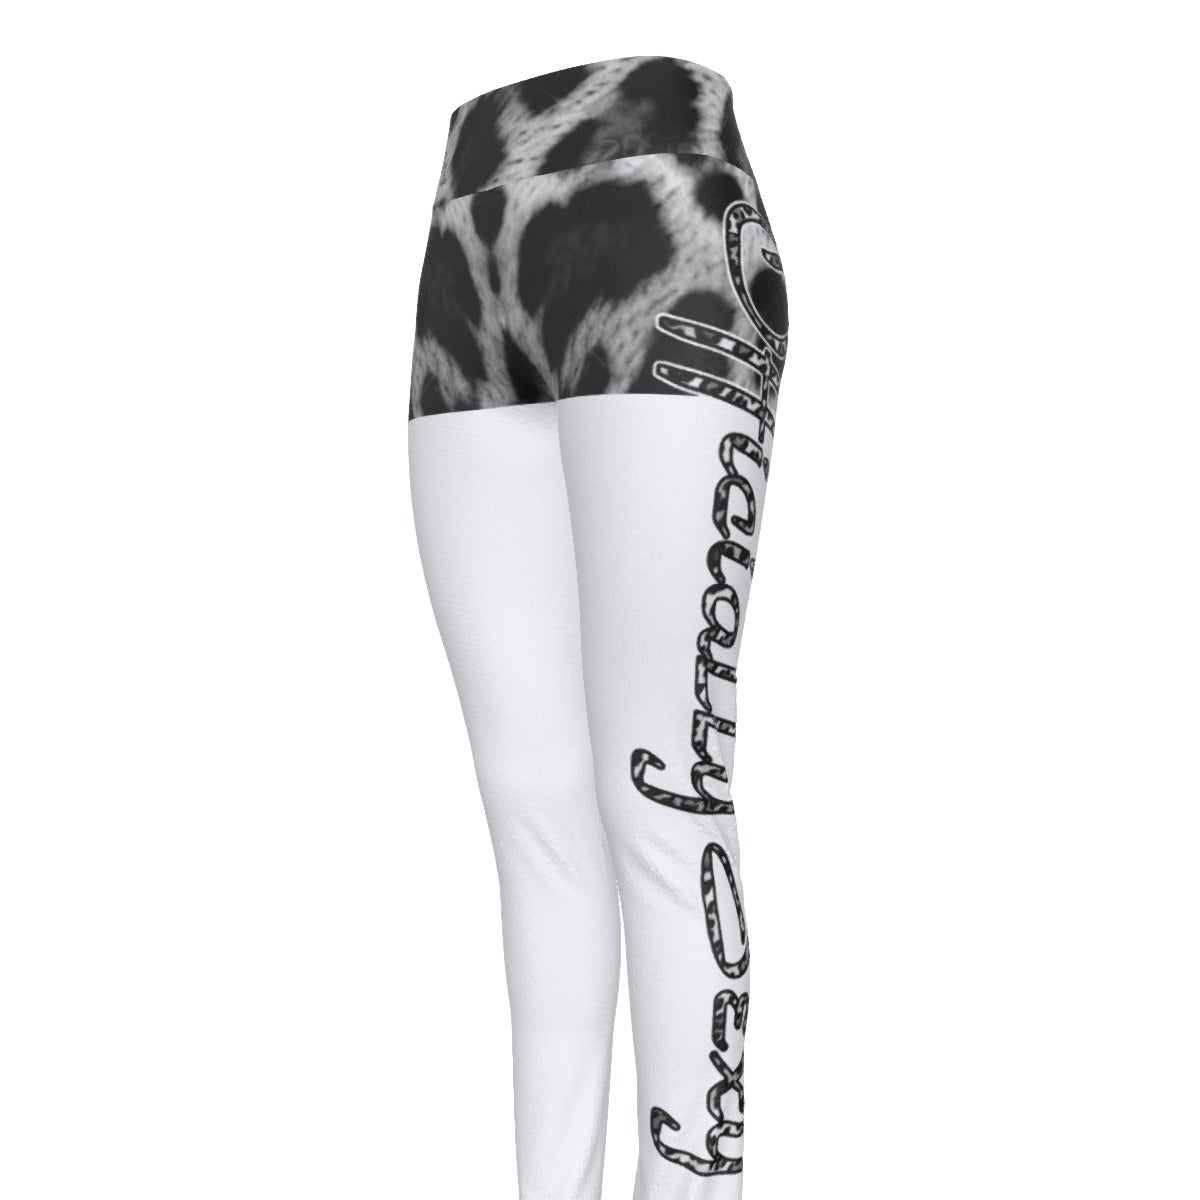  Officially Sexy Snow Leopard Print Collection Women's White AOP High Waist Booty Popper Leggings #2 (English) 4